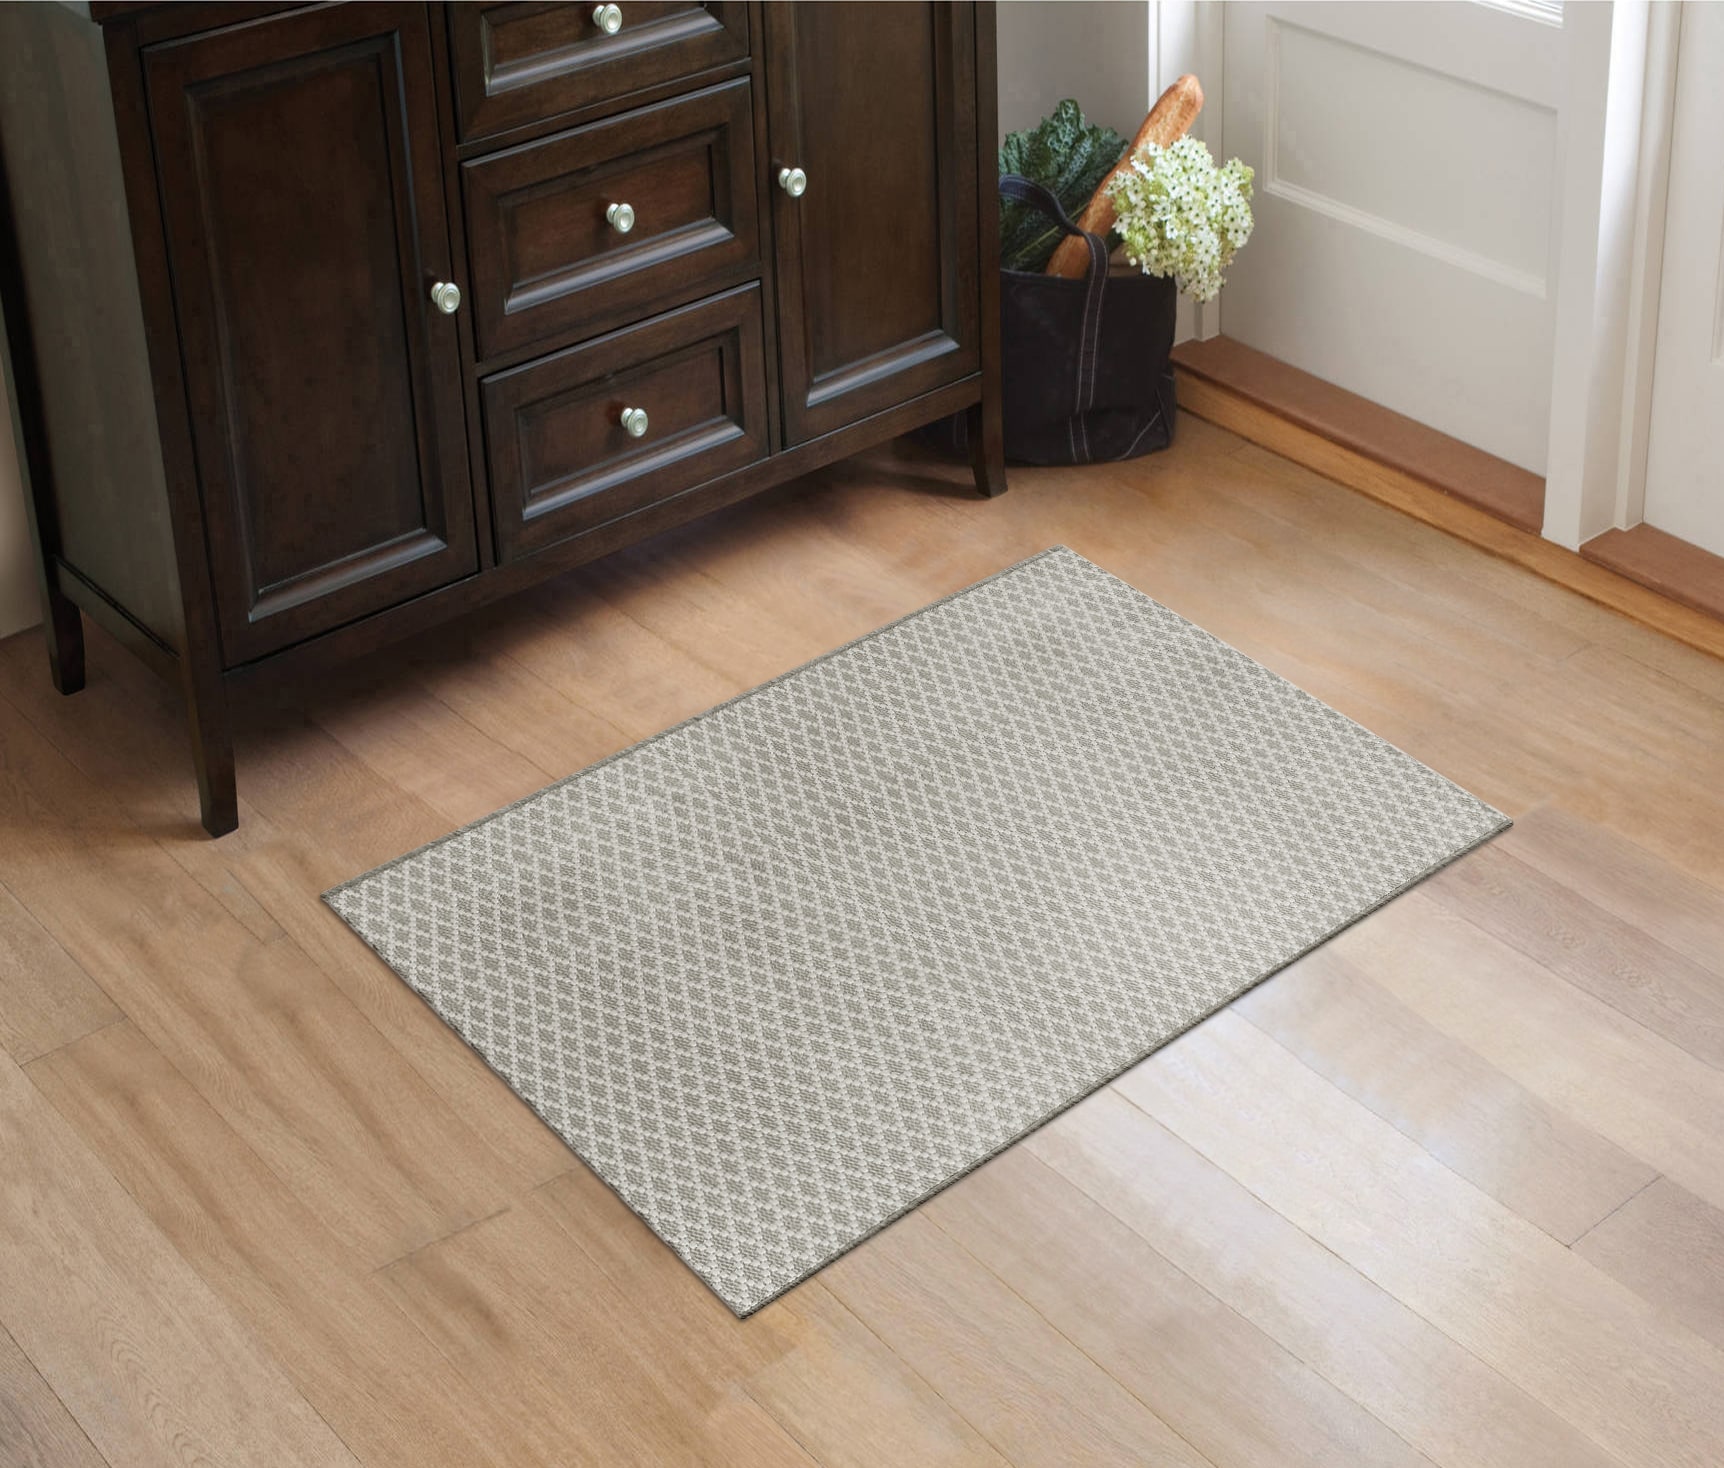 Hold-a-Rug - Non-Slip Rug Pad, Reversible Rubber Gripper, Non Skid Pads for  Hardwood, Vinyl, Tile, Laminate Floors, Keep Area Rugs Secure, Safe for